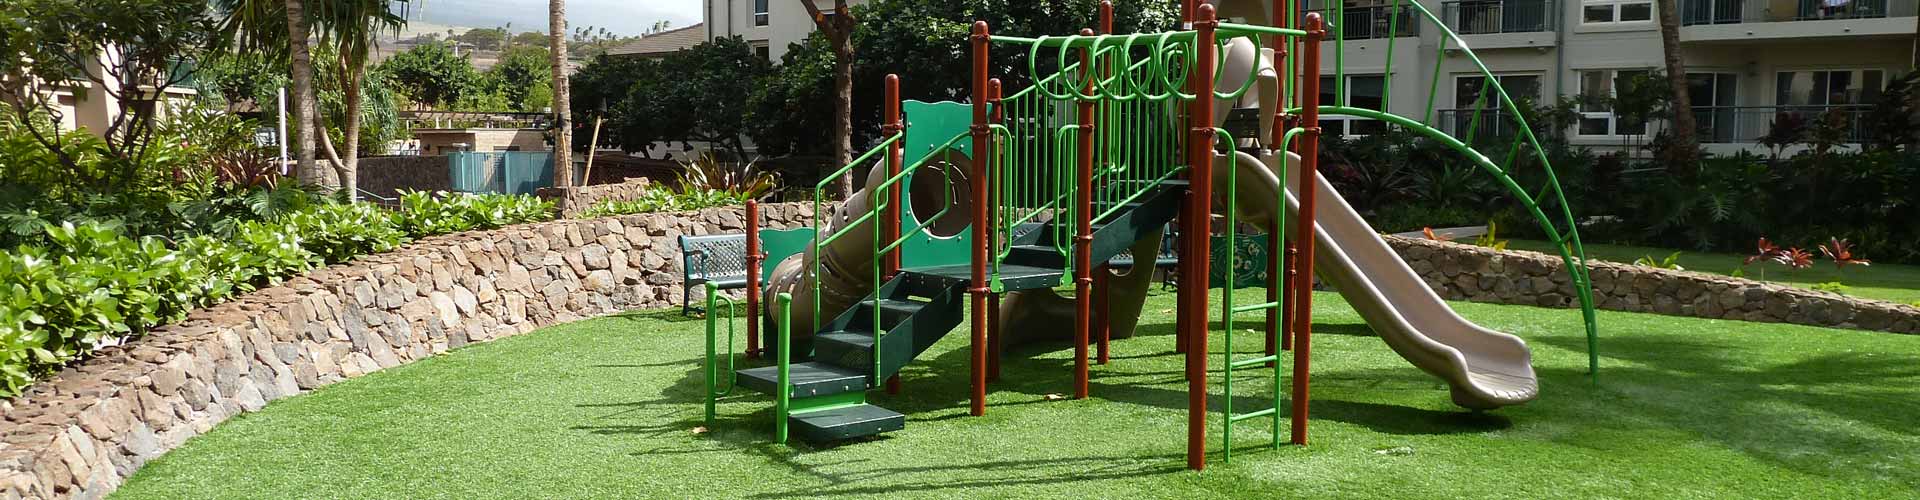 Synthetic turf playground grass by Southwest Greens of Hawaii